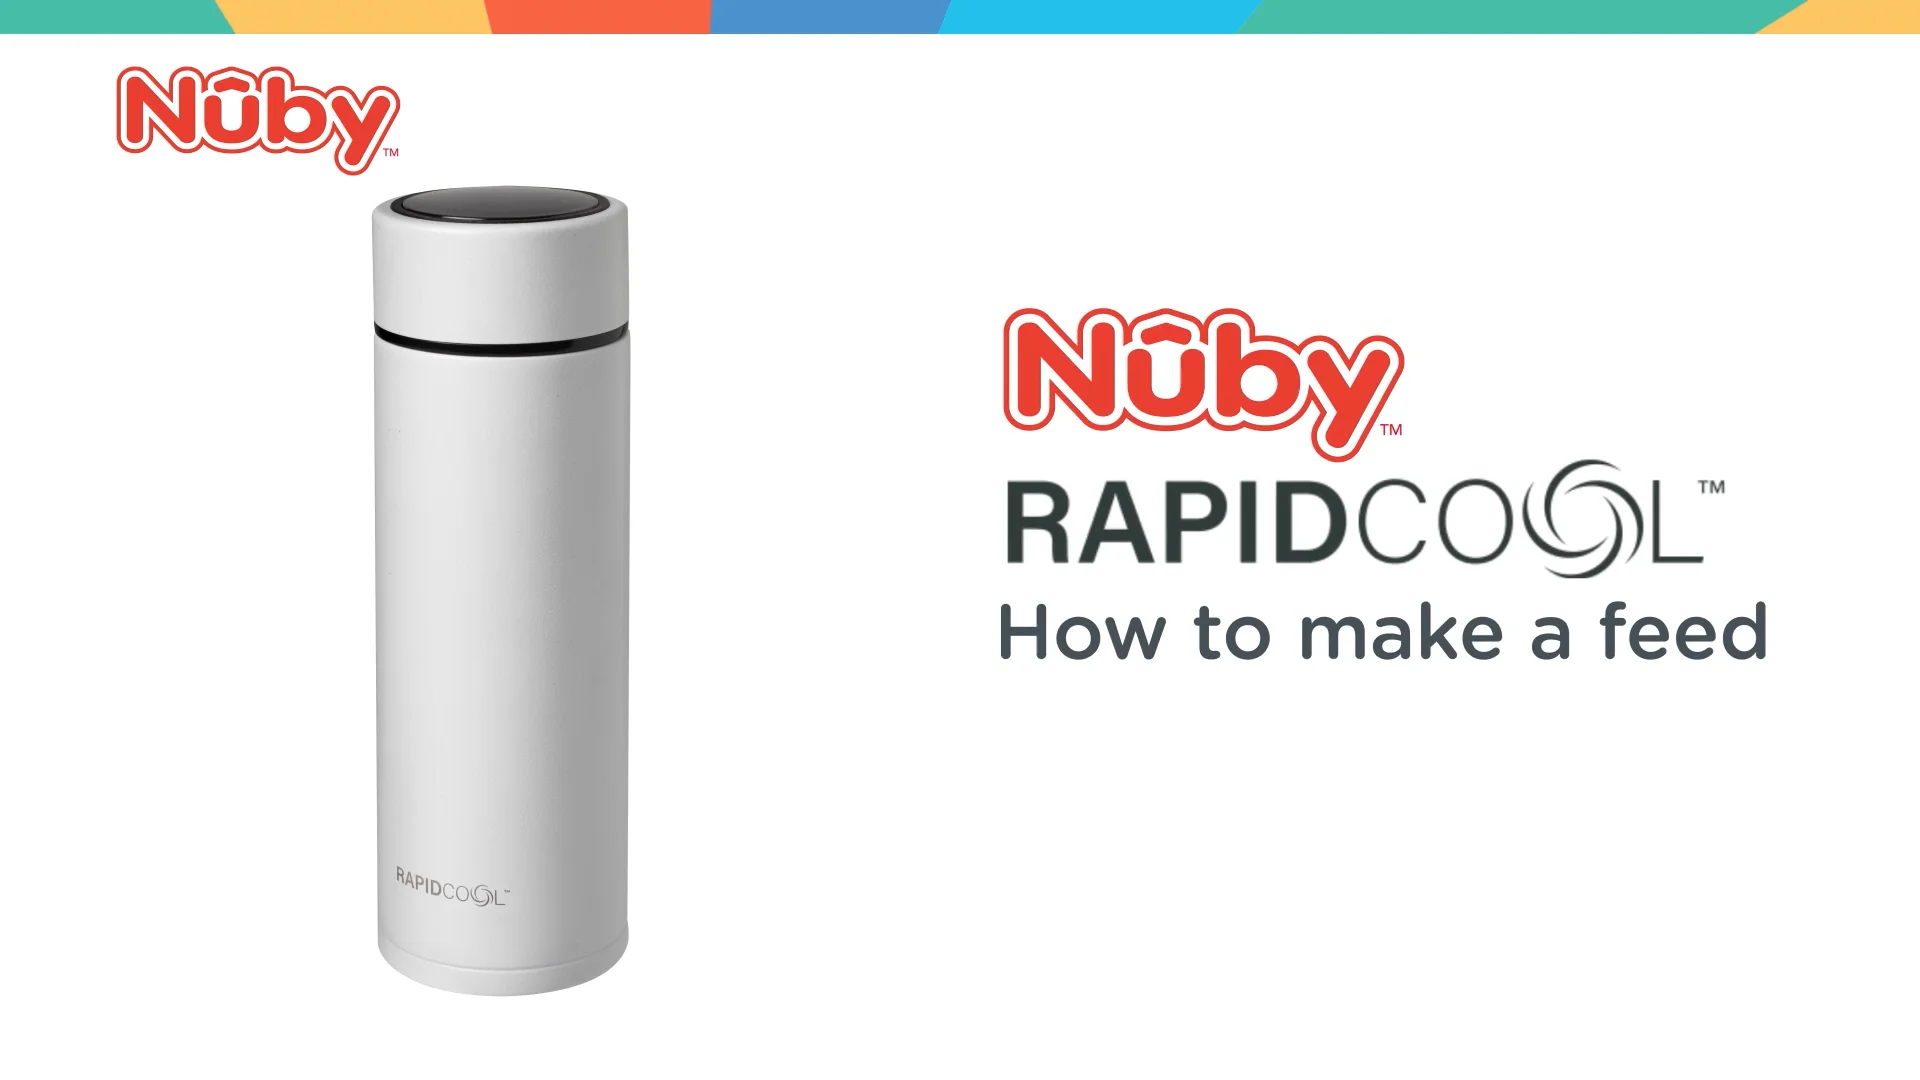 How to Use the Nuby RapidCool™ on Vimeo